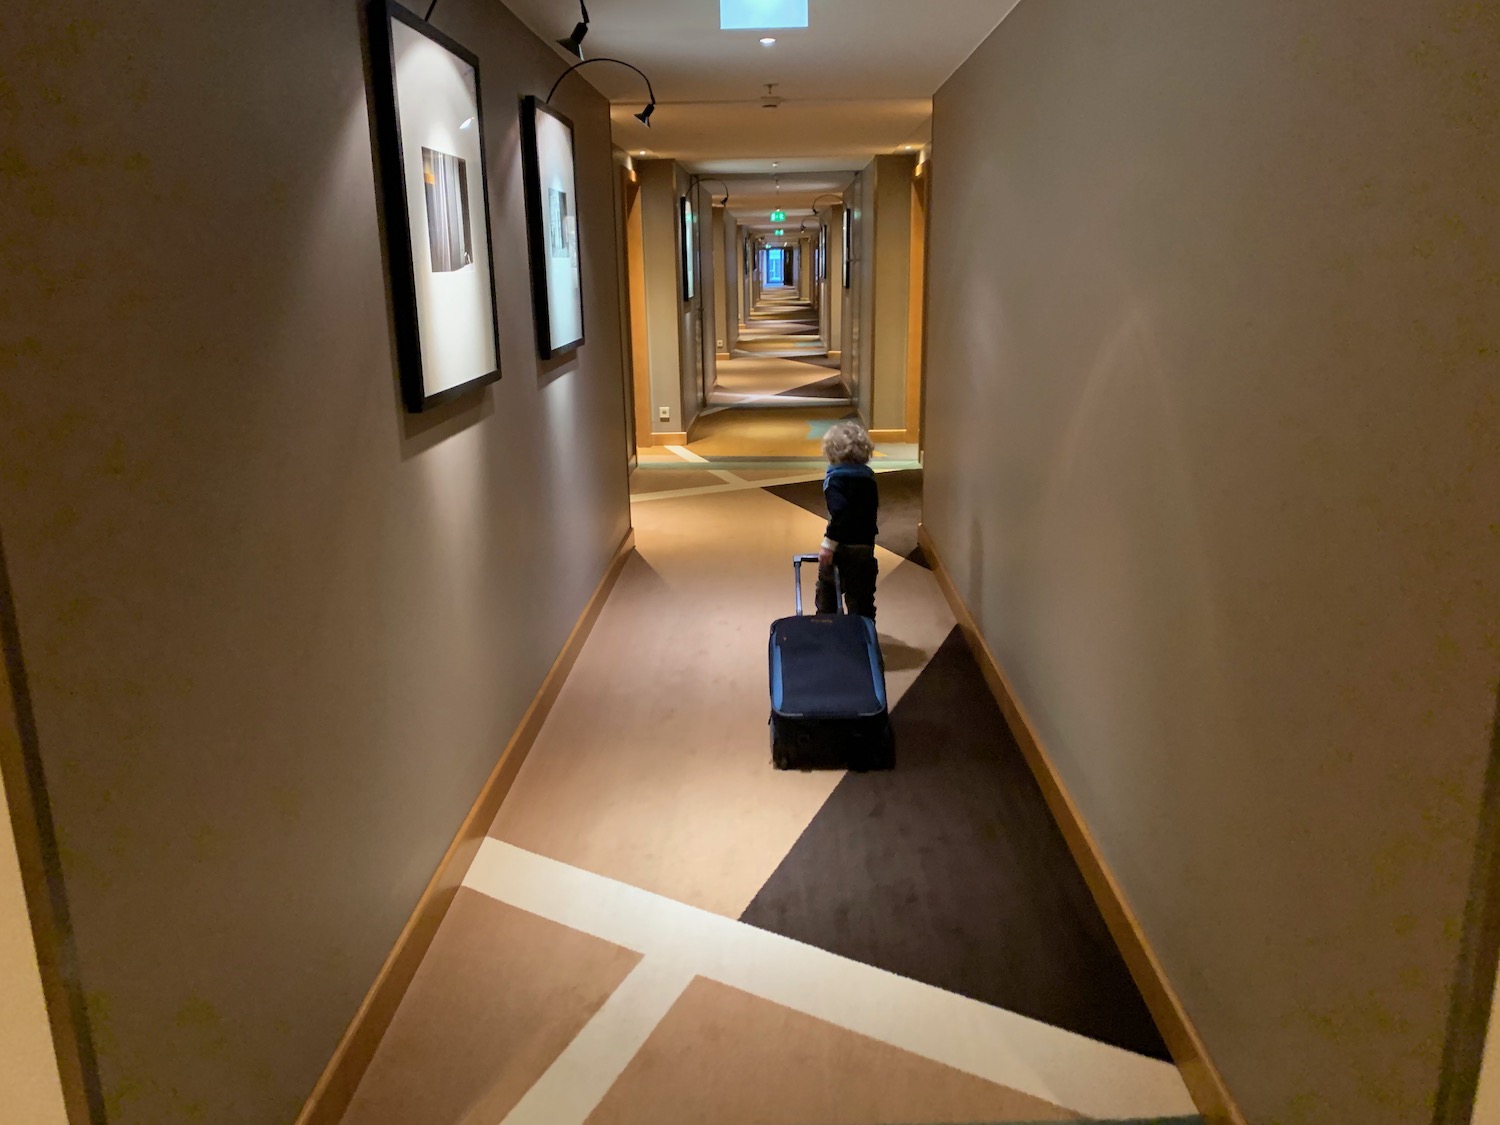 a child with a suitcase in a hallway